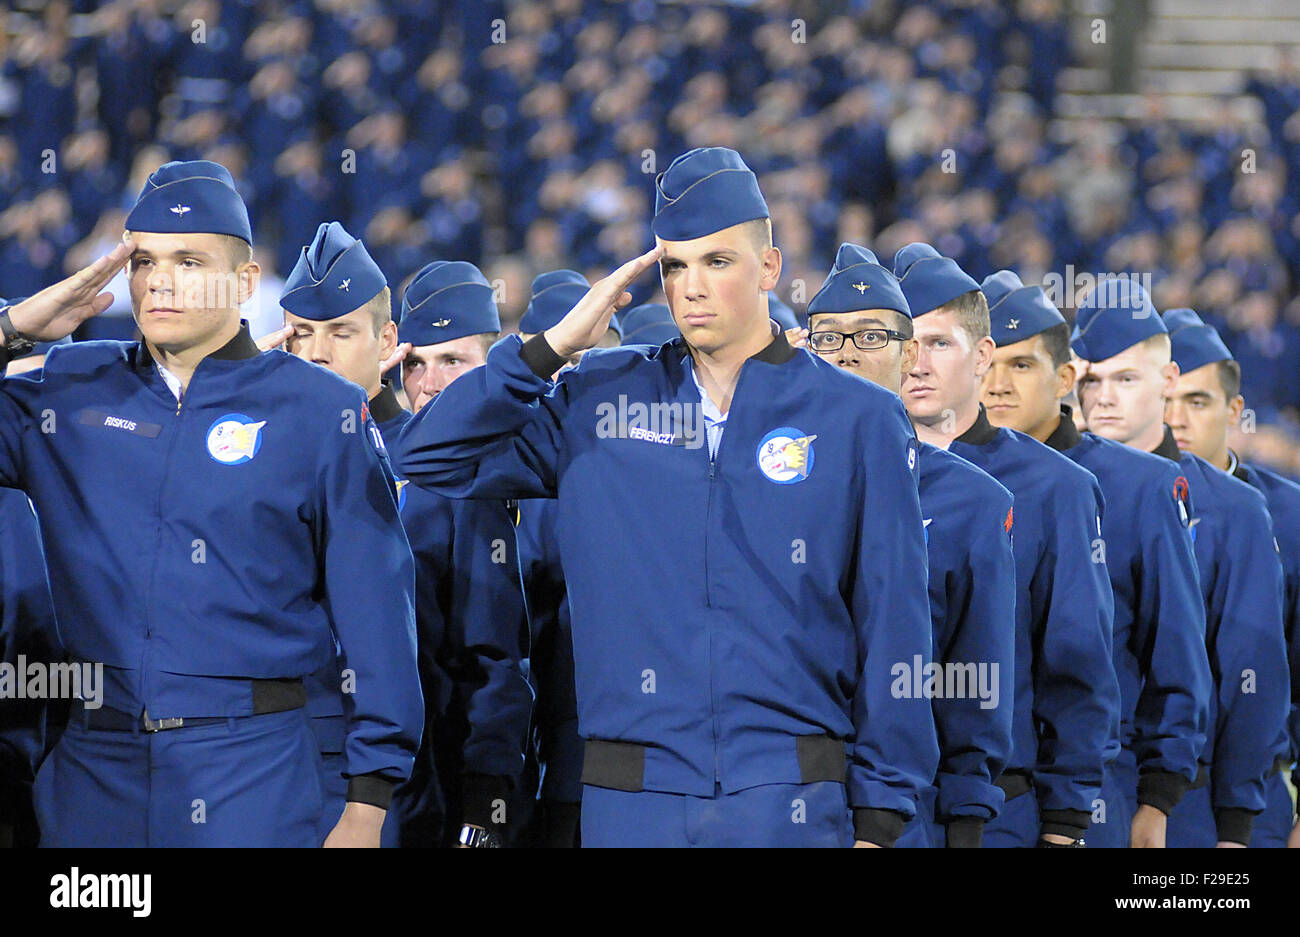 Colorado Springs, Colorado, USA. 12th Sep, 2015. The Air Force Academy Corps of Cadets at attention prior to Mountain West Conference action between the San Jose State Spartans and the Air Force Academy Falcons at Falcon Stadium, U.S. Air Force Academy, Colorado Springs, Colorado. Air Force defeats San Jose State 37-16. © csm/Alamy Live News Stock Photo